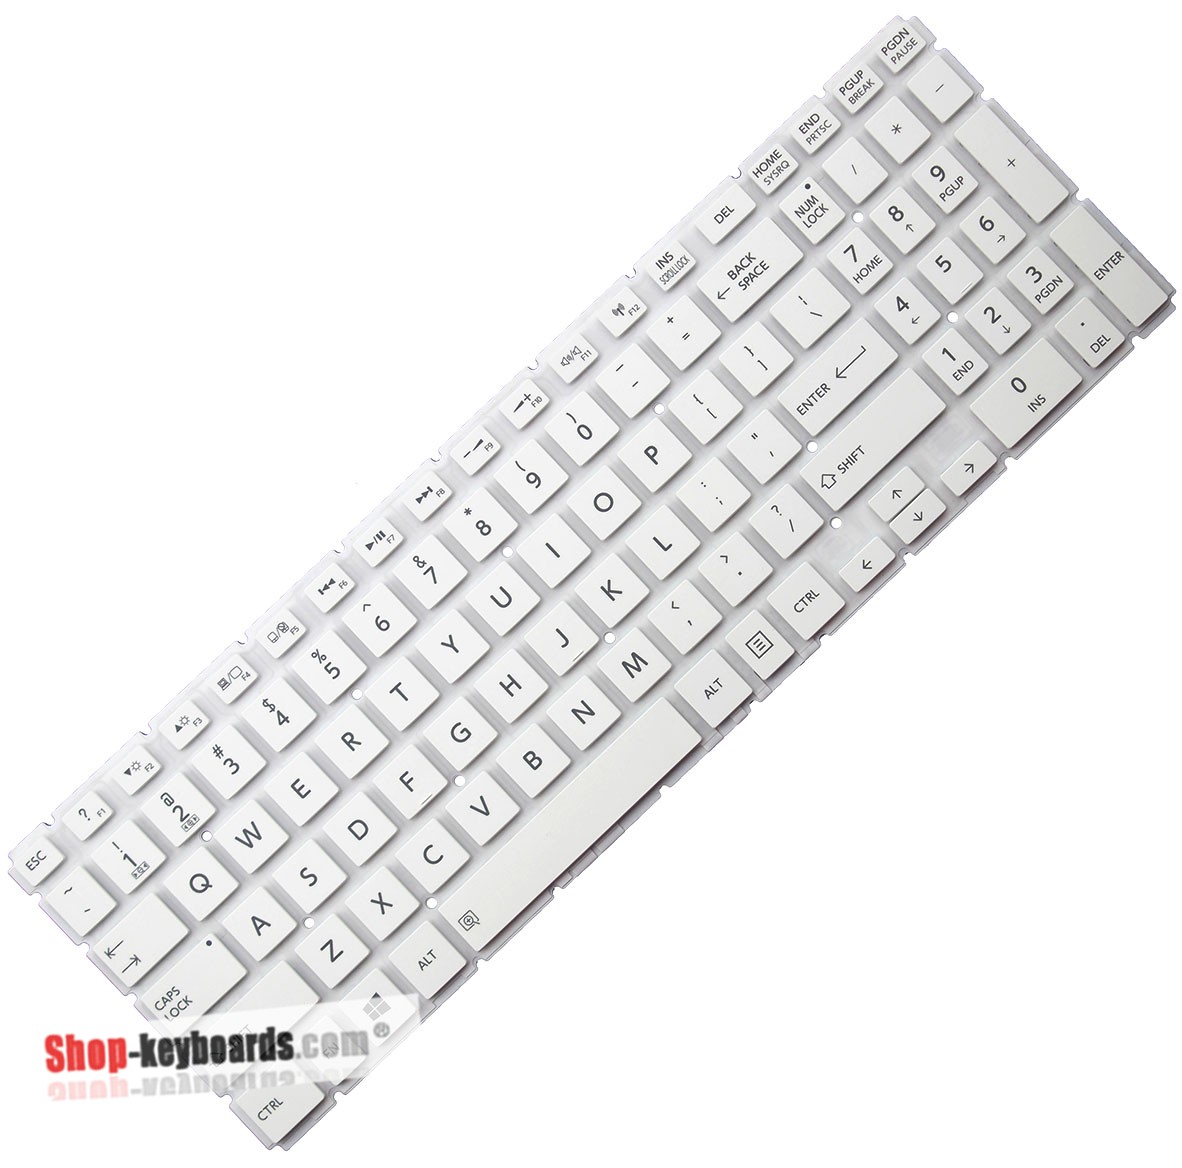 Toshiba MP-13R83US-920 Keyboard replacement